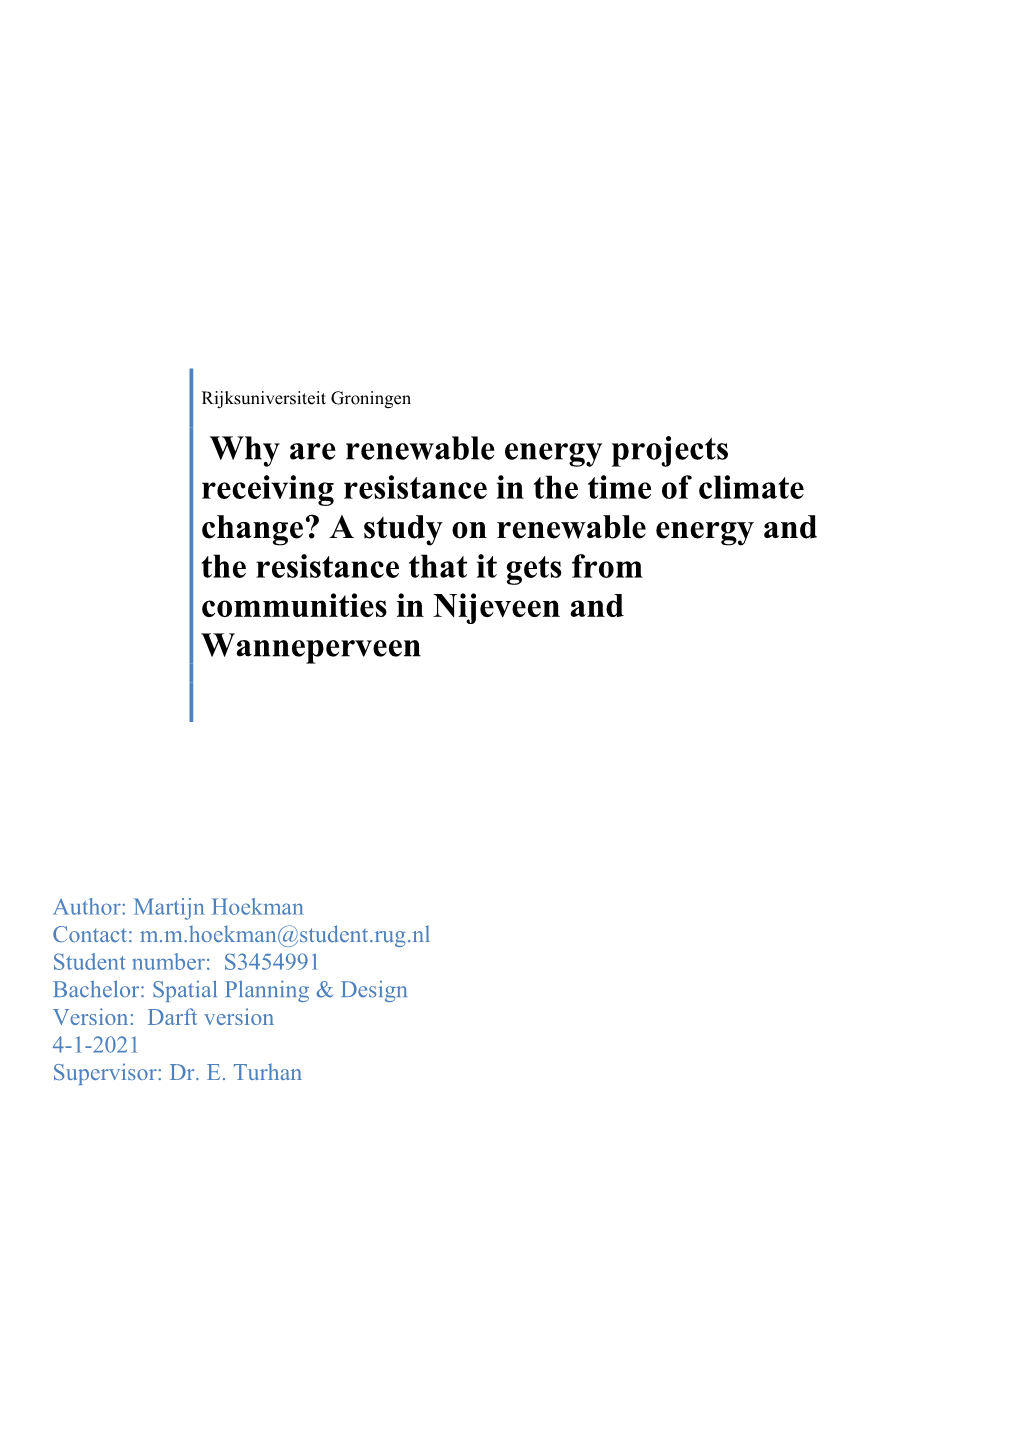 Why Are Renewable Energy Projects Receiving Resistance in the Time of Climate Change?